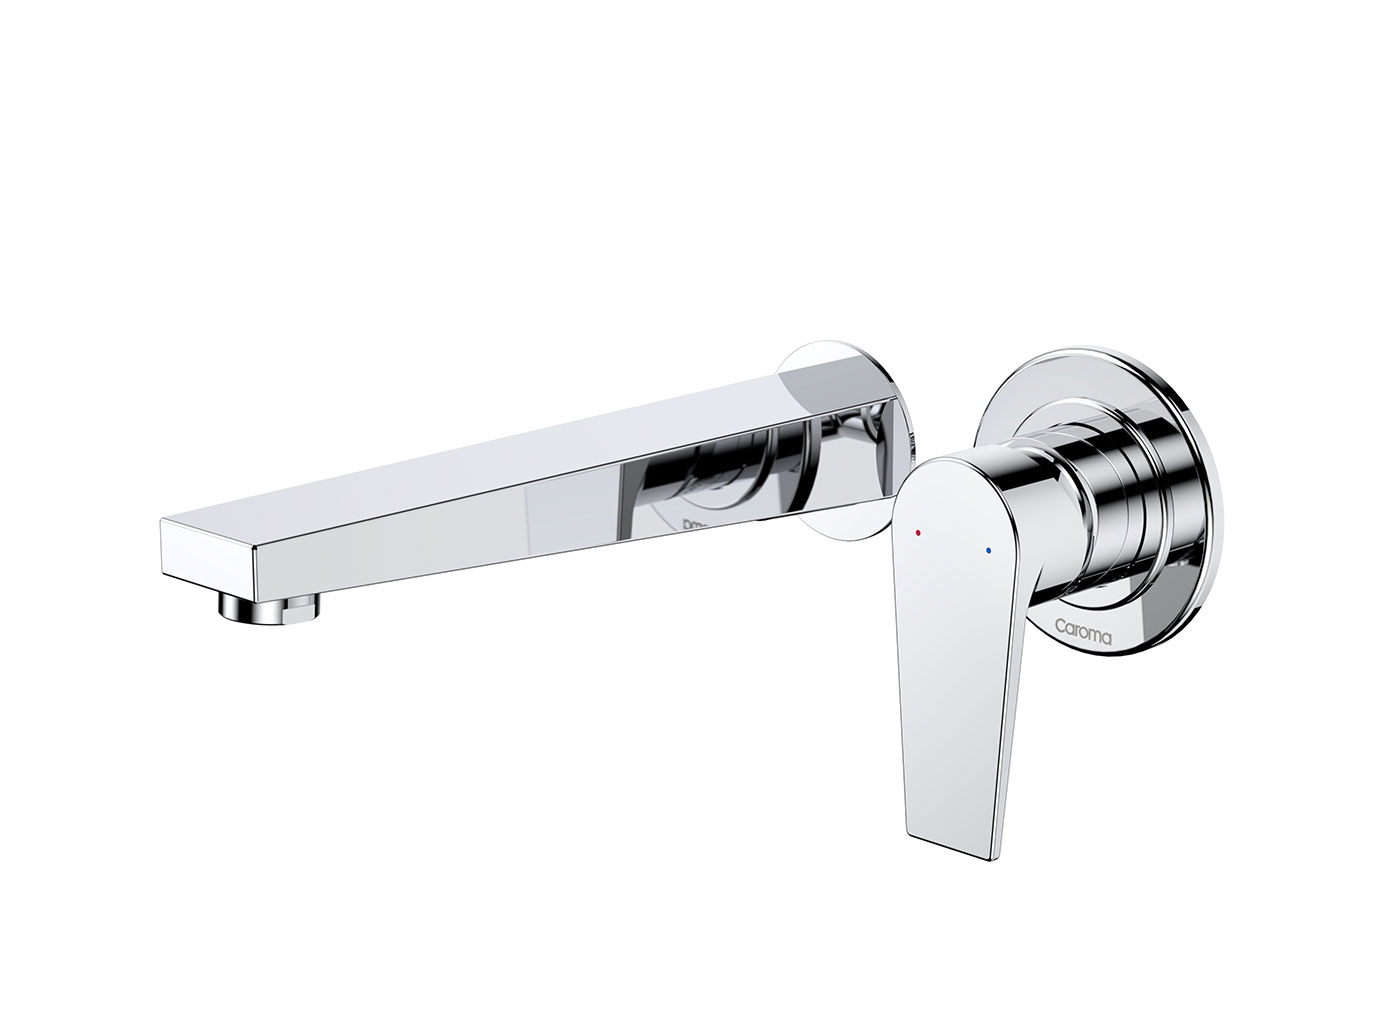 The Vivas range is a refined design with a contemporary twist; the solid handles and polished finish will give your bathroom the ultra-modern look.